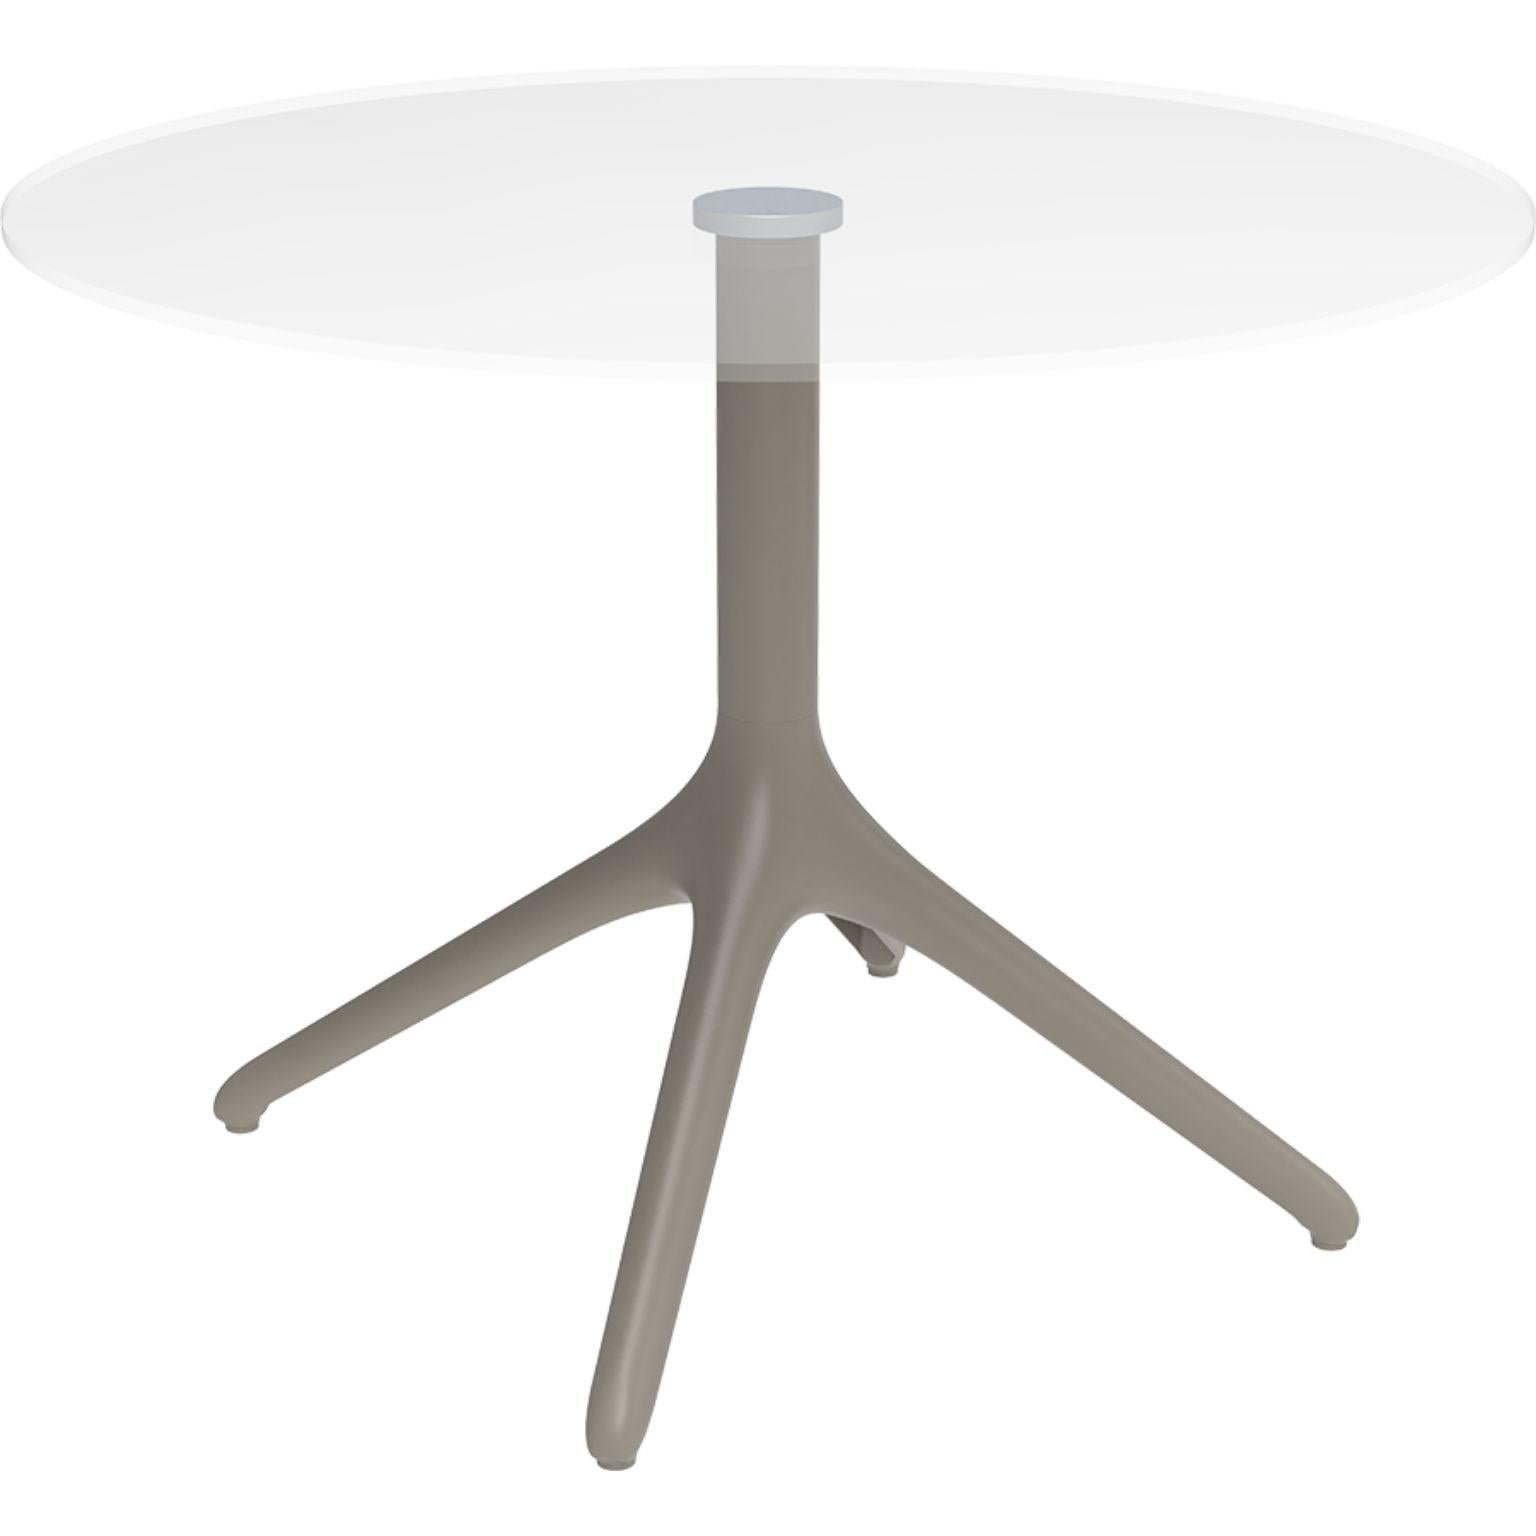 Uni cream table XL 73 by Mowee.
Dimensions: D50 x H73 cm.
Material: Aluminium, tempered glass.
Weight: 9 kg.
Also Available in different colours and finishes. 

A table designed to be as versatile as possible and can coexist with a variety of